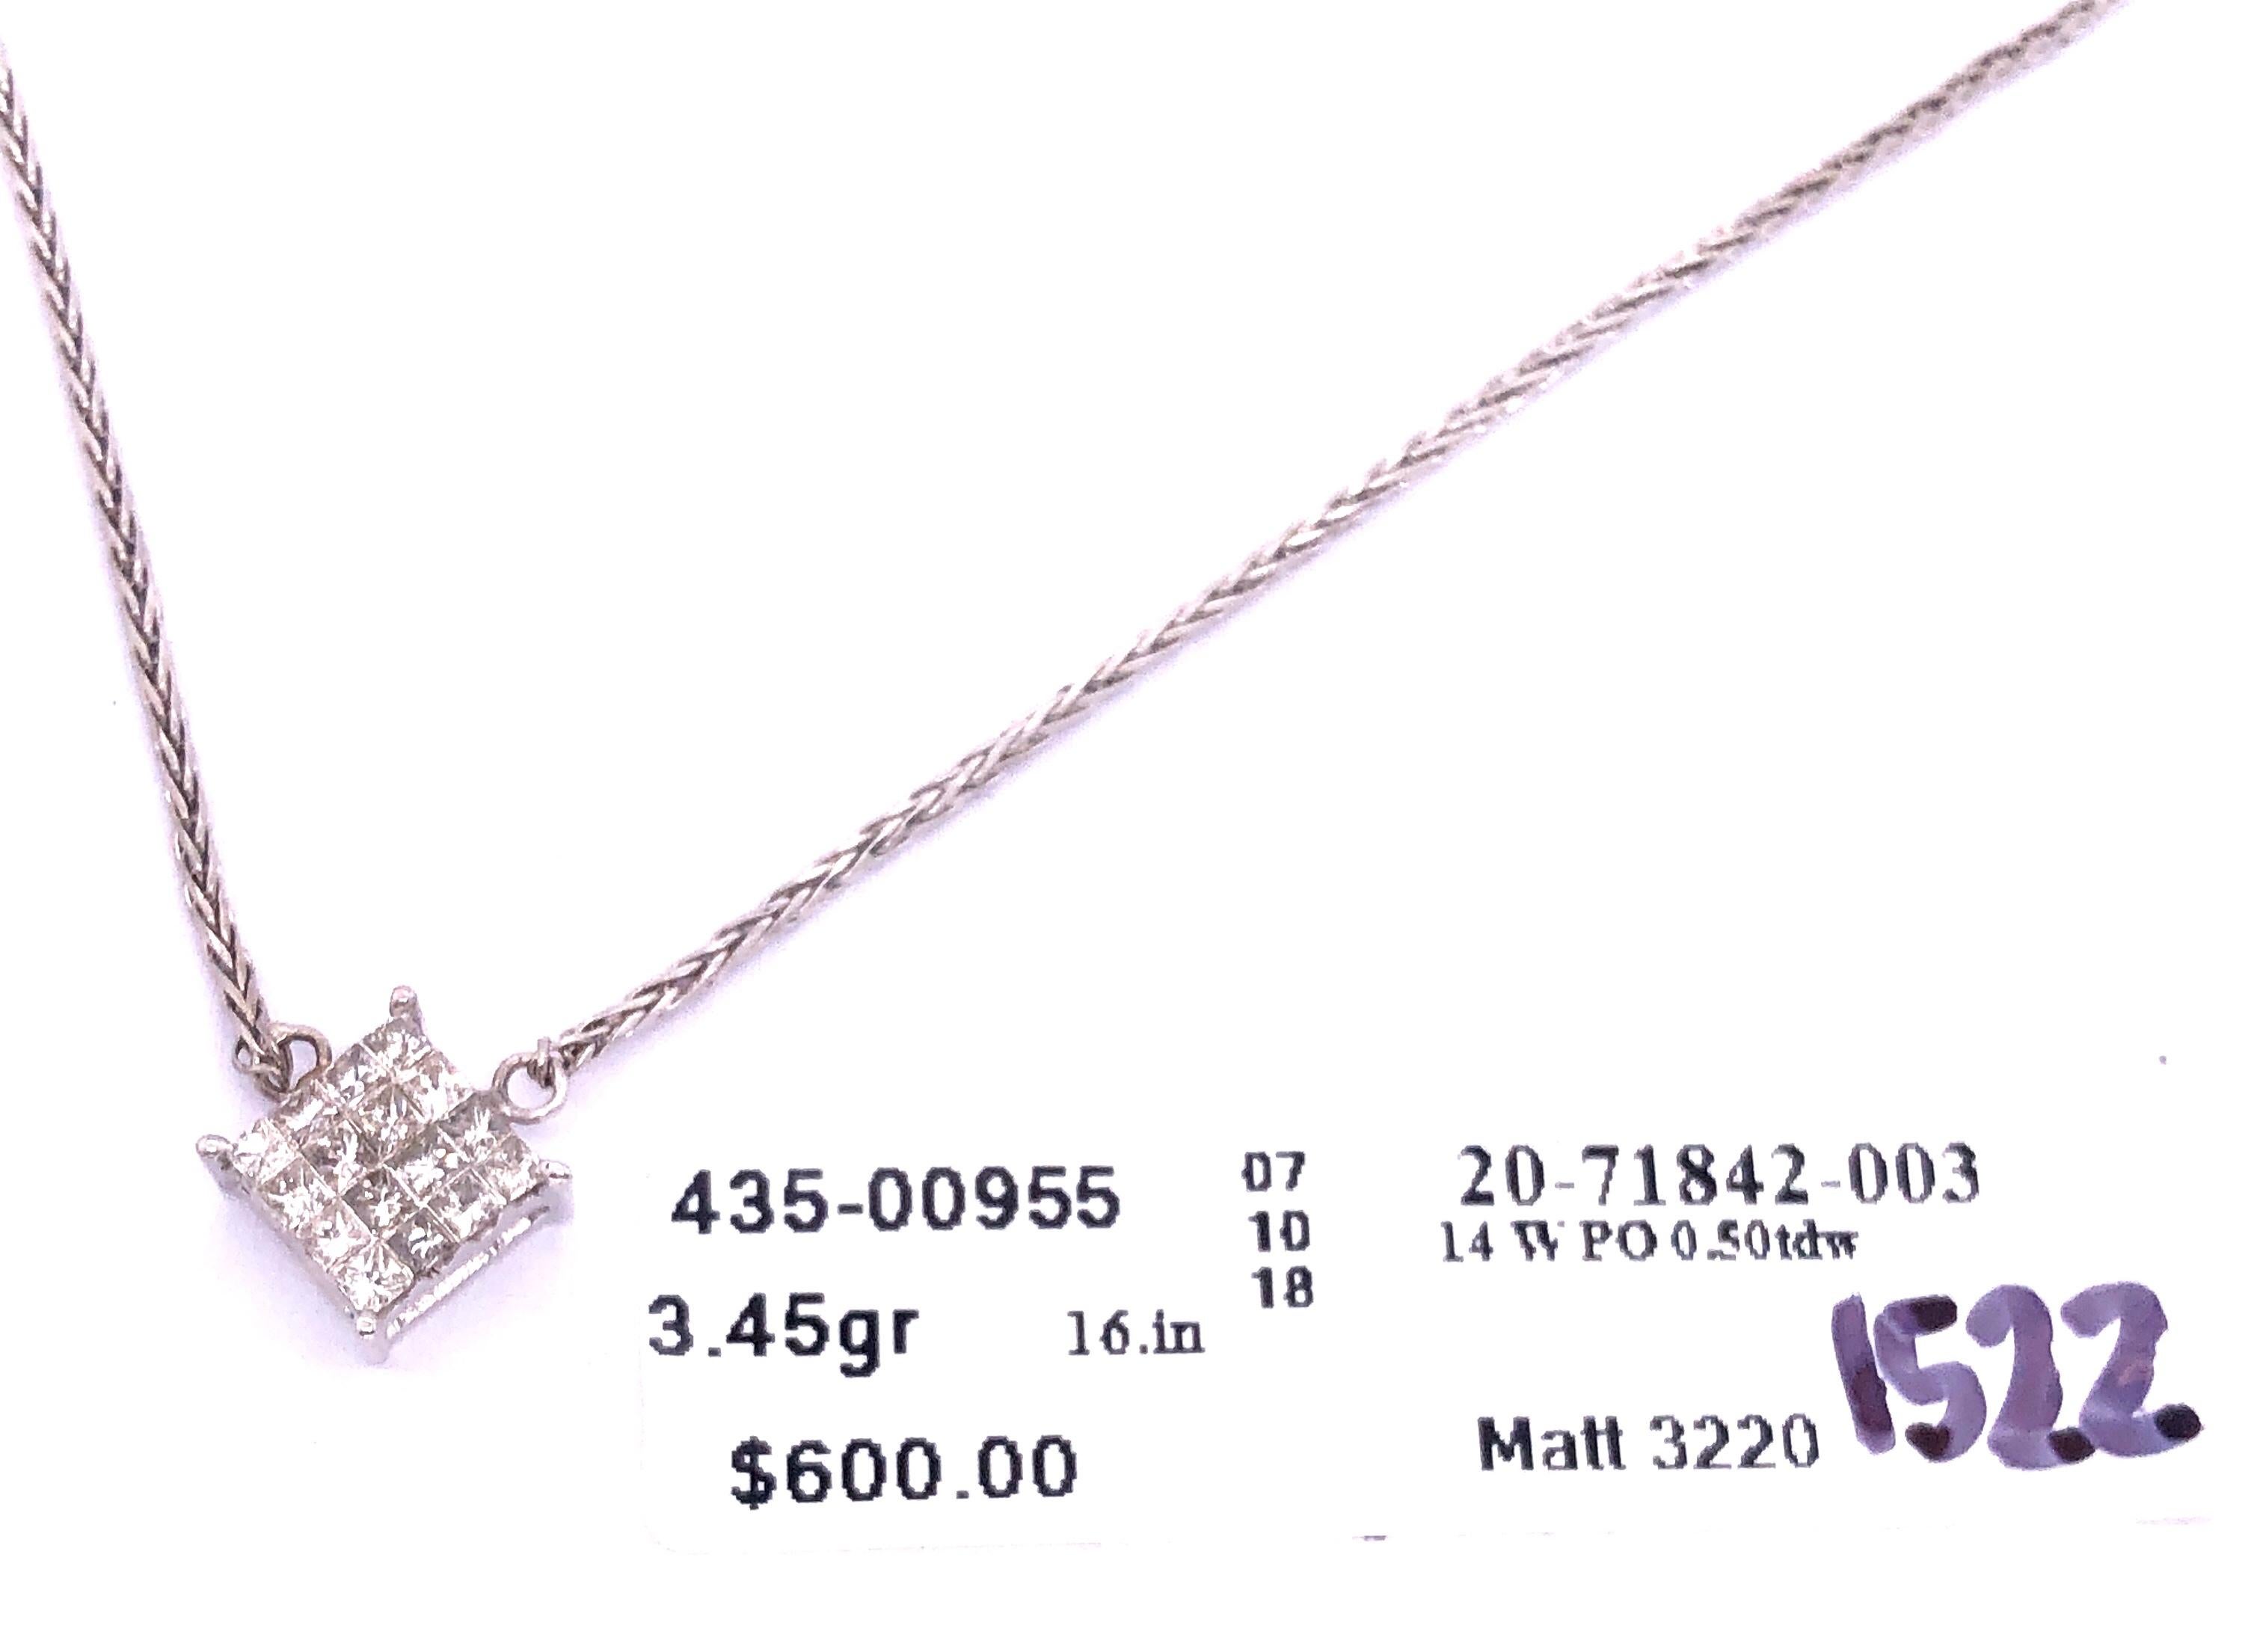 14 Karat White Gold Necklace with Diamond Pendant For Sale 2